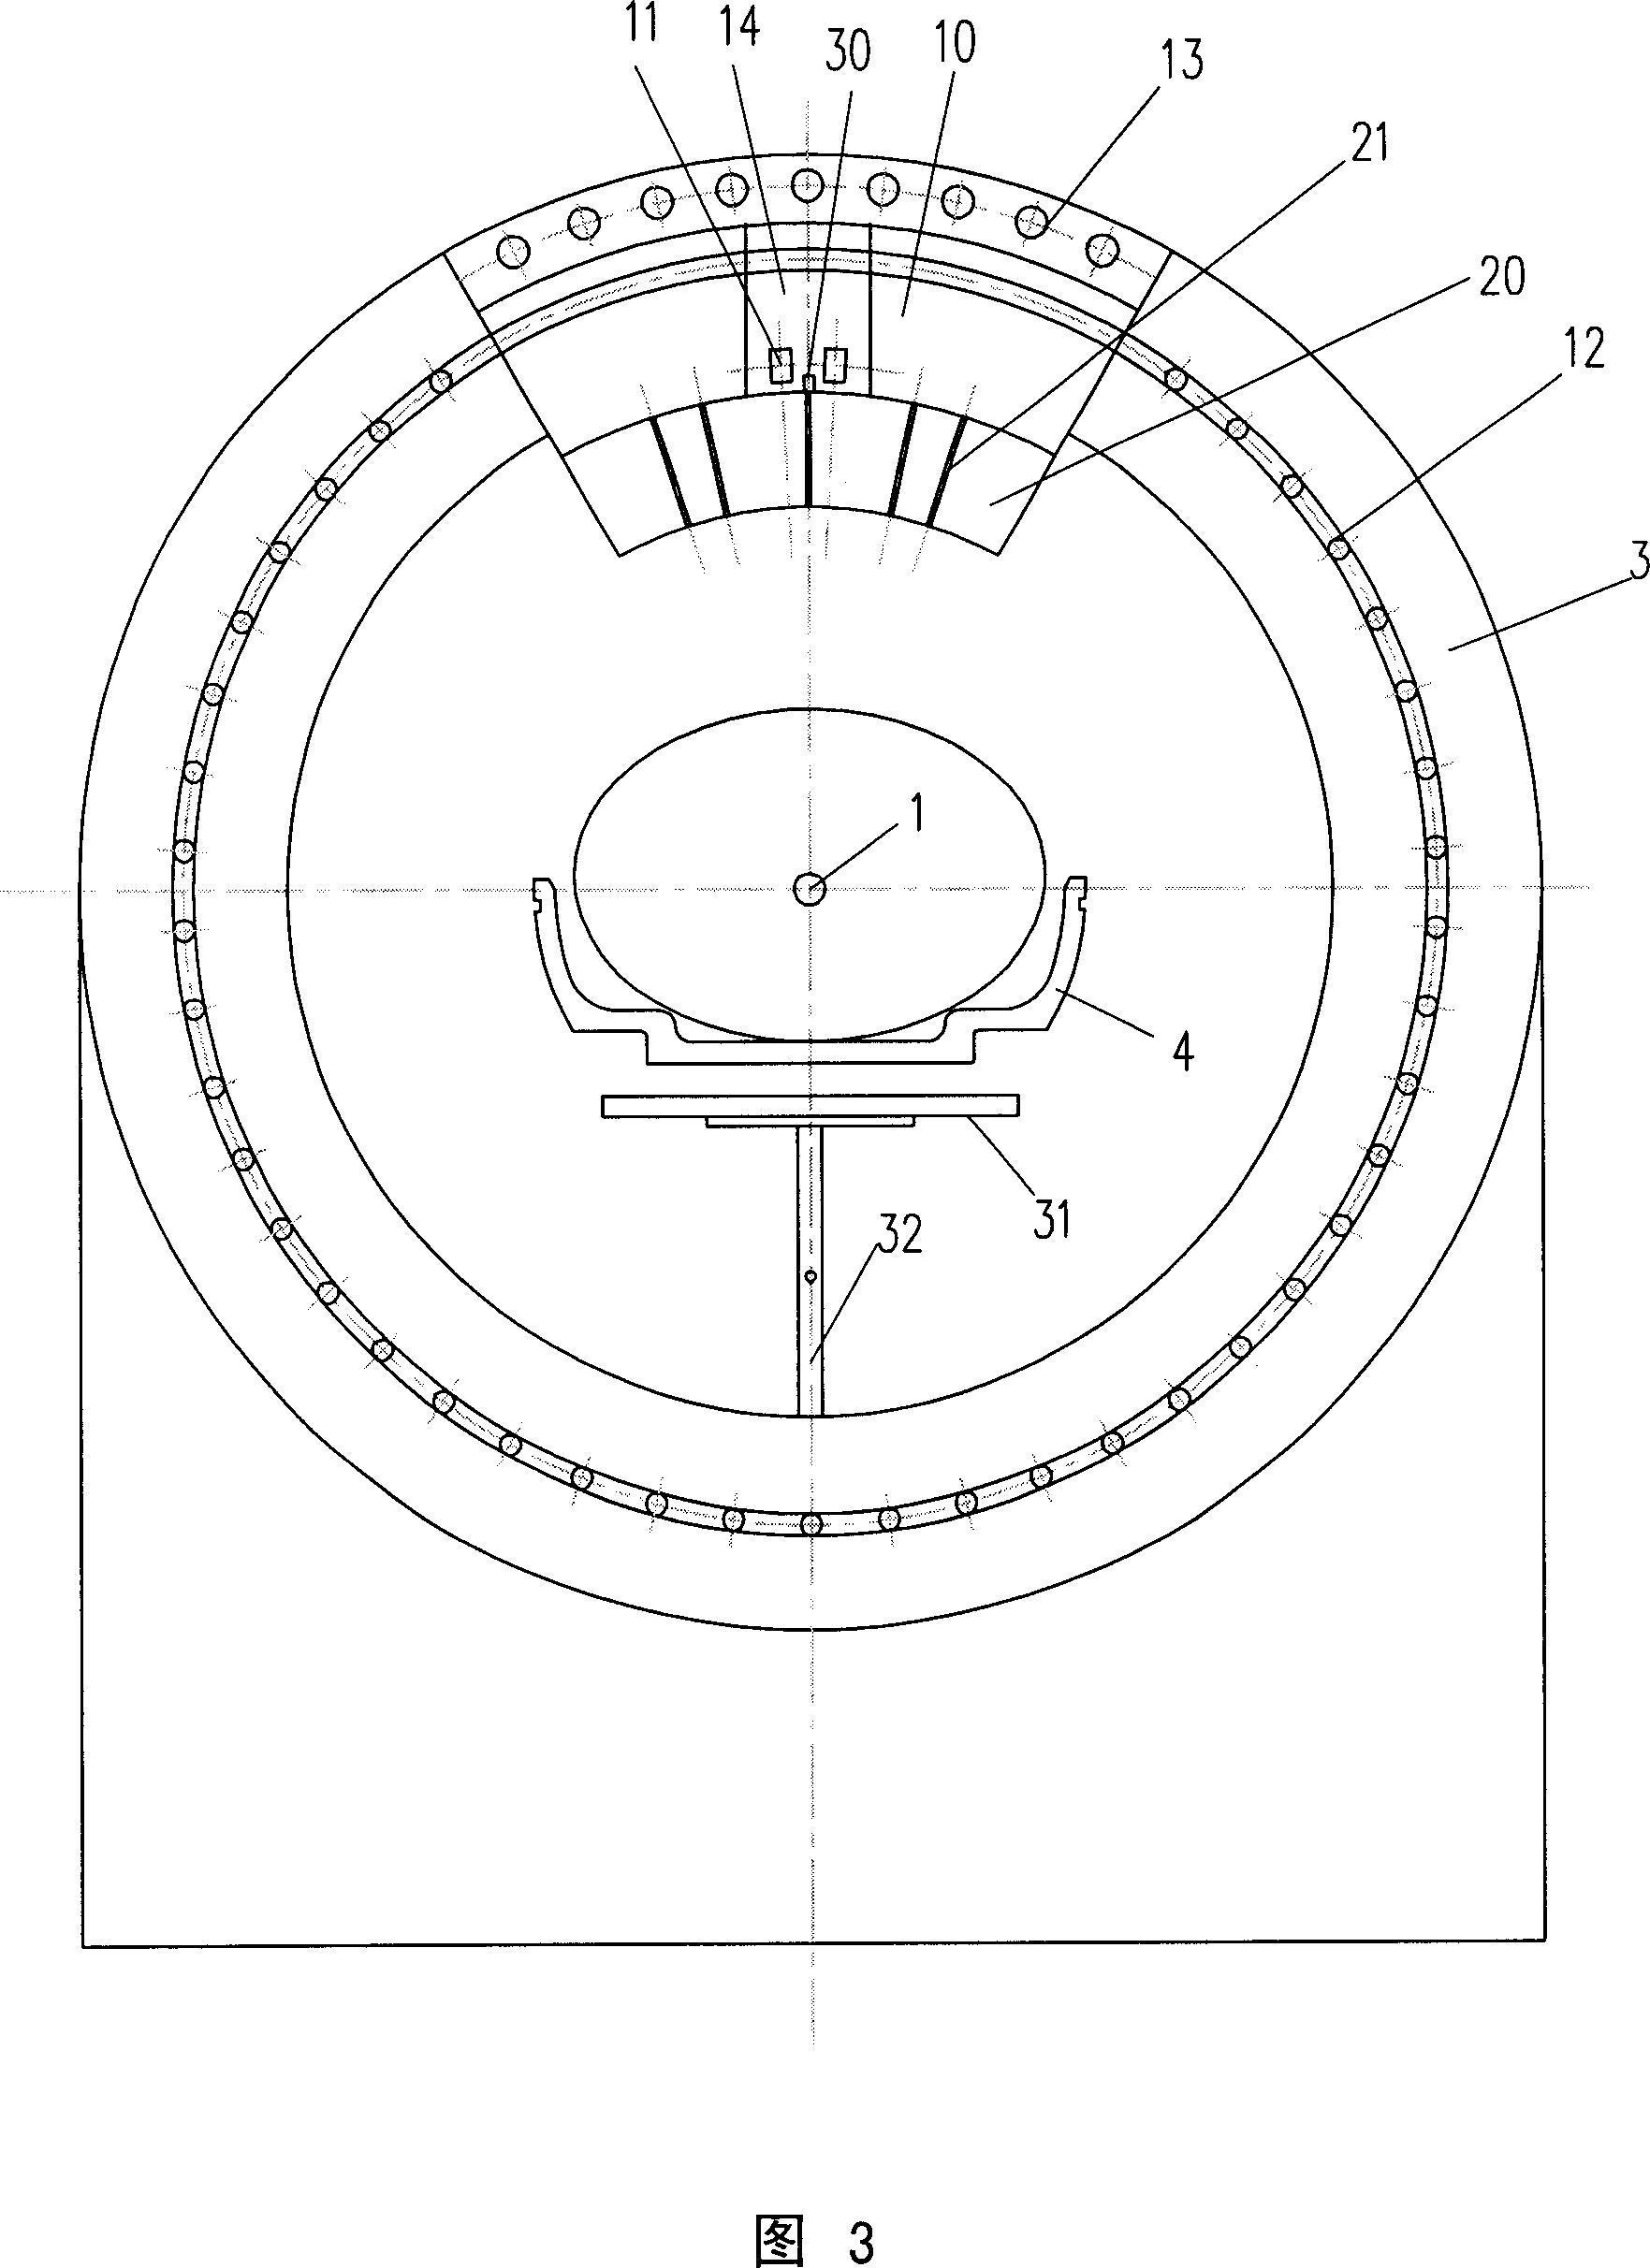 Radiation therapeutical device